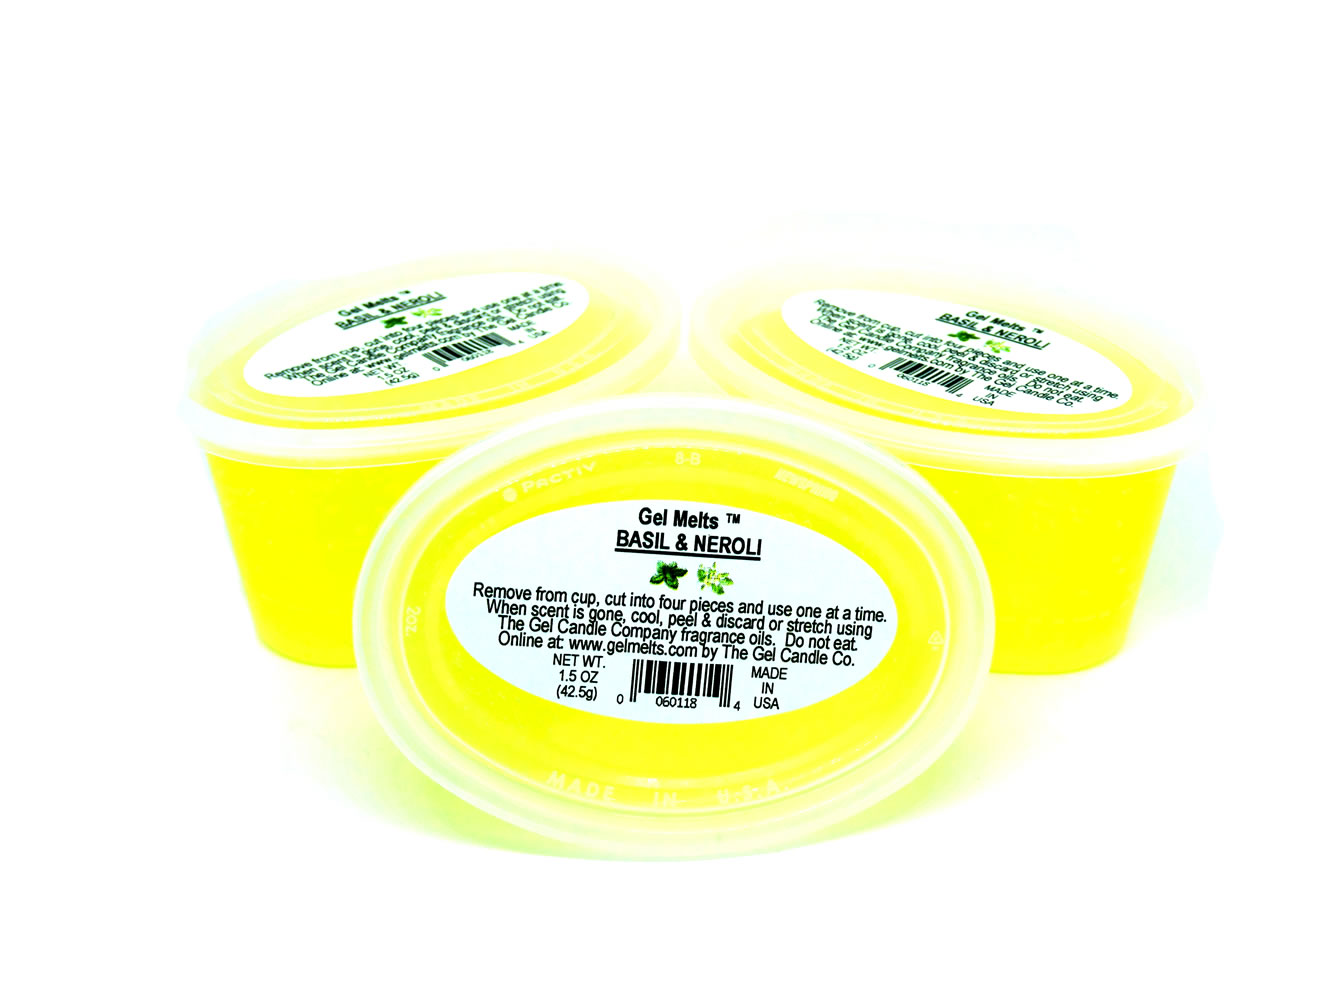 Basil And Neroli scented Gel Melts™ Gel Wax for warmers 3 pack